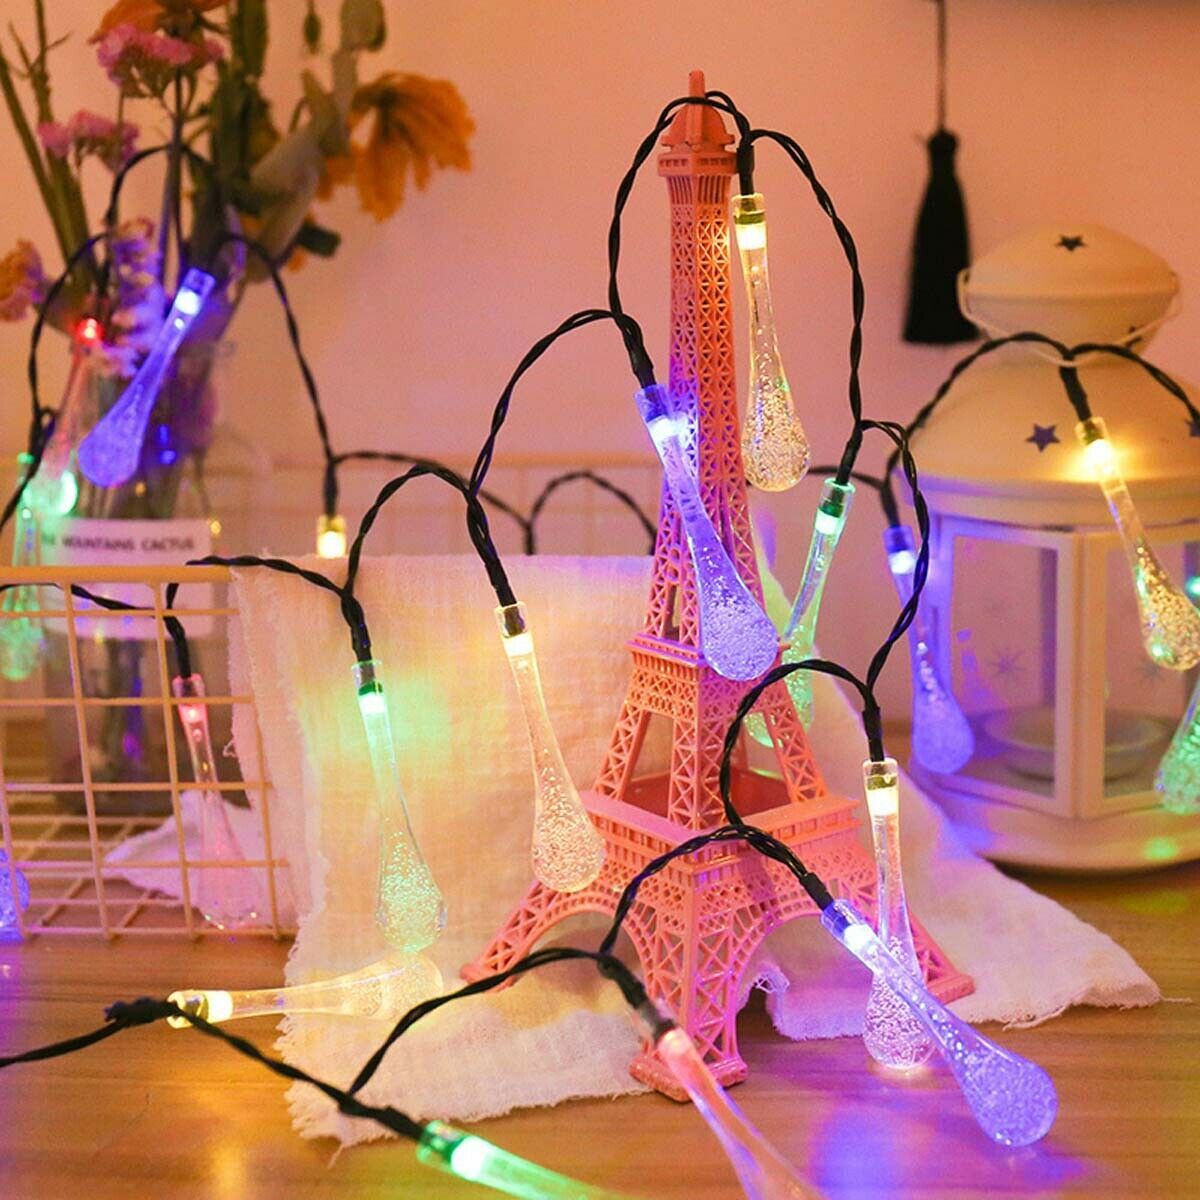 164FT-5M-20LED-Solar-Outdoor-String-Light-Two-Modes-Water-Drop-Fairy-Lamp-Garden-Christmas-Decoratio-1719881